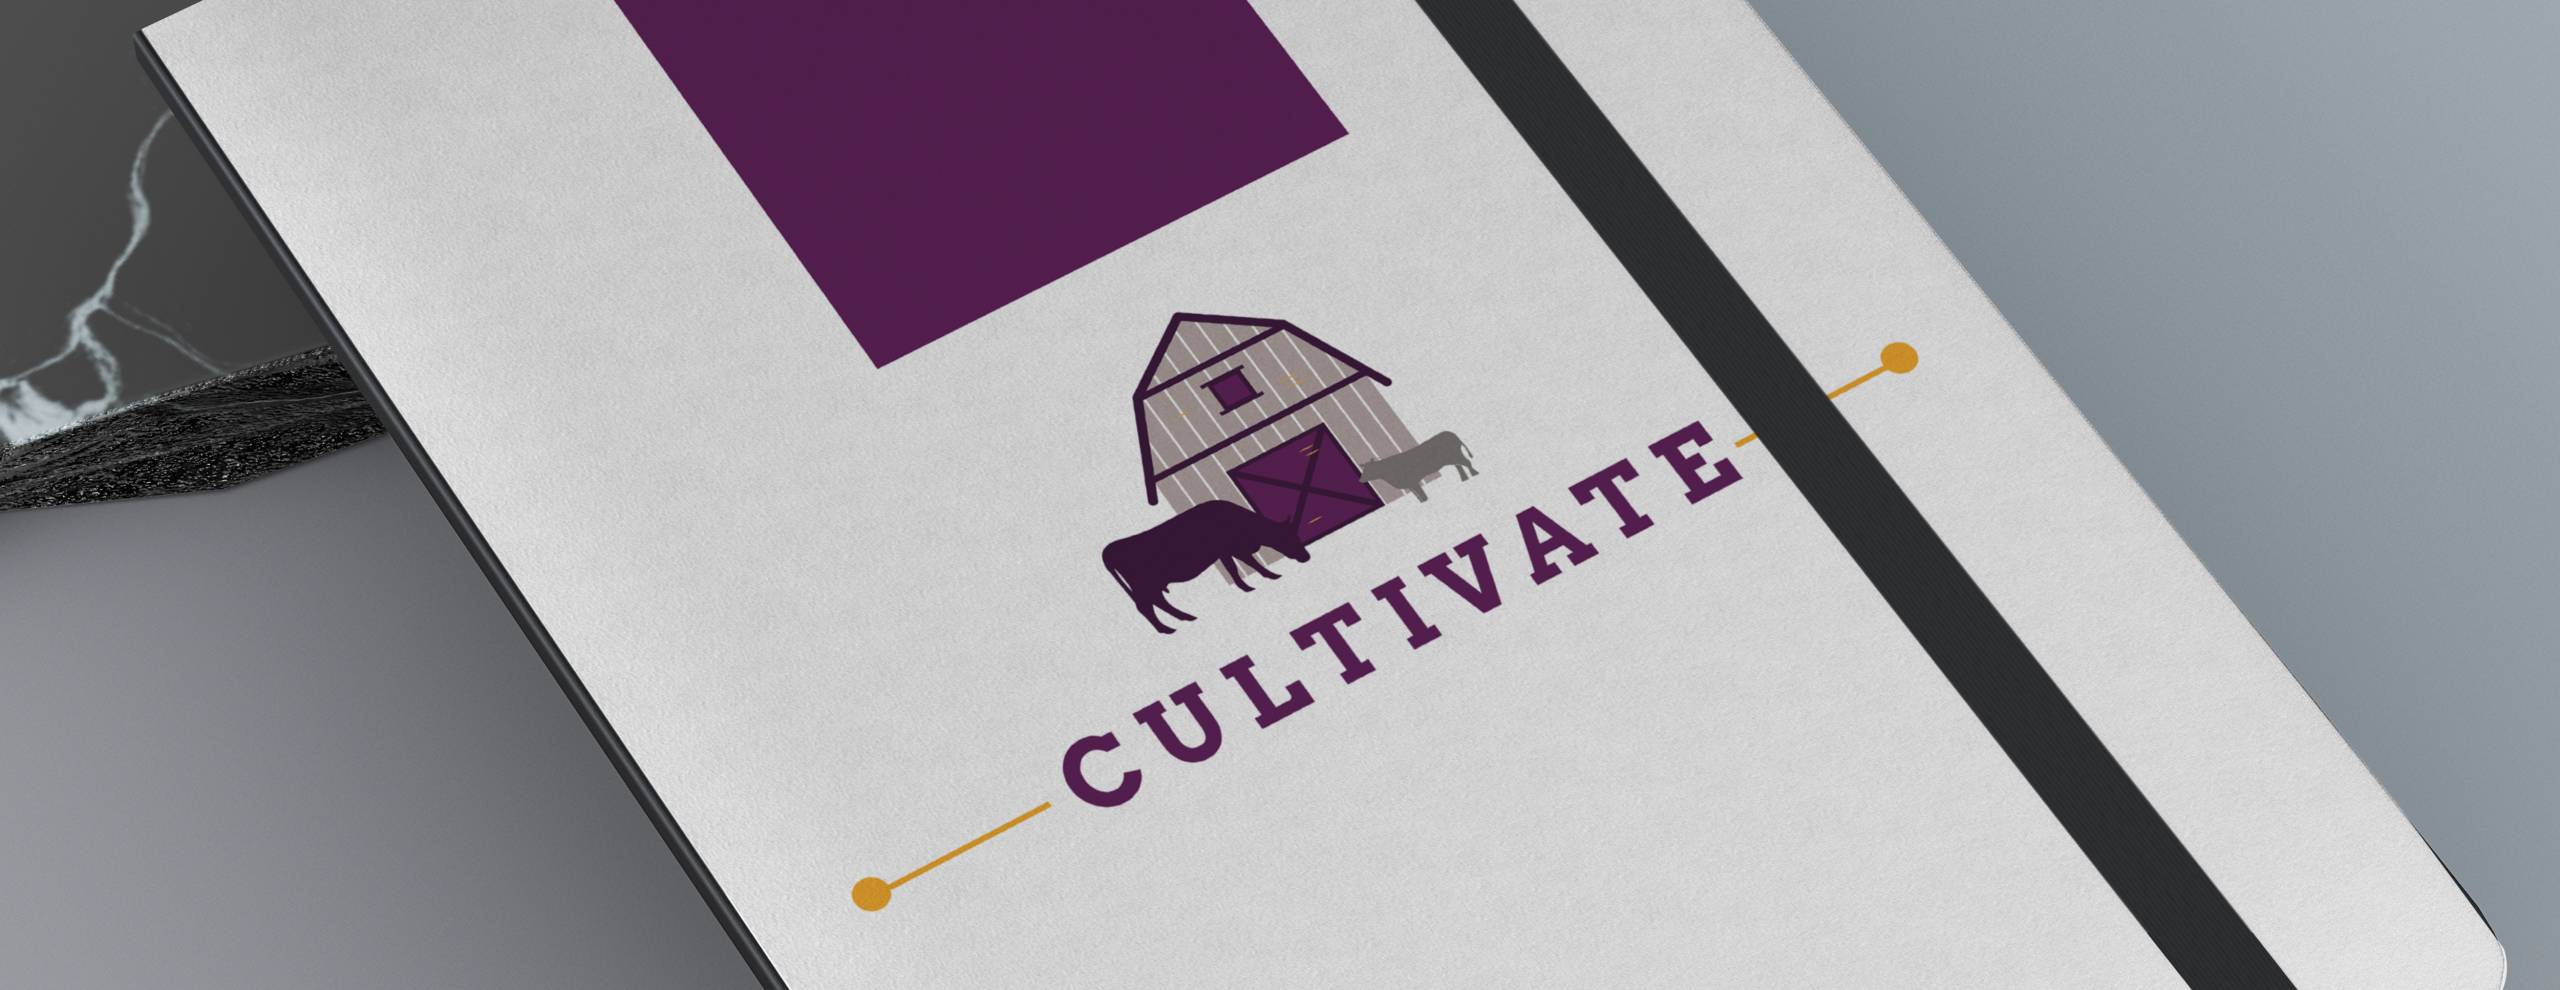 cultivate-8-scaled-1